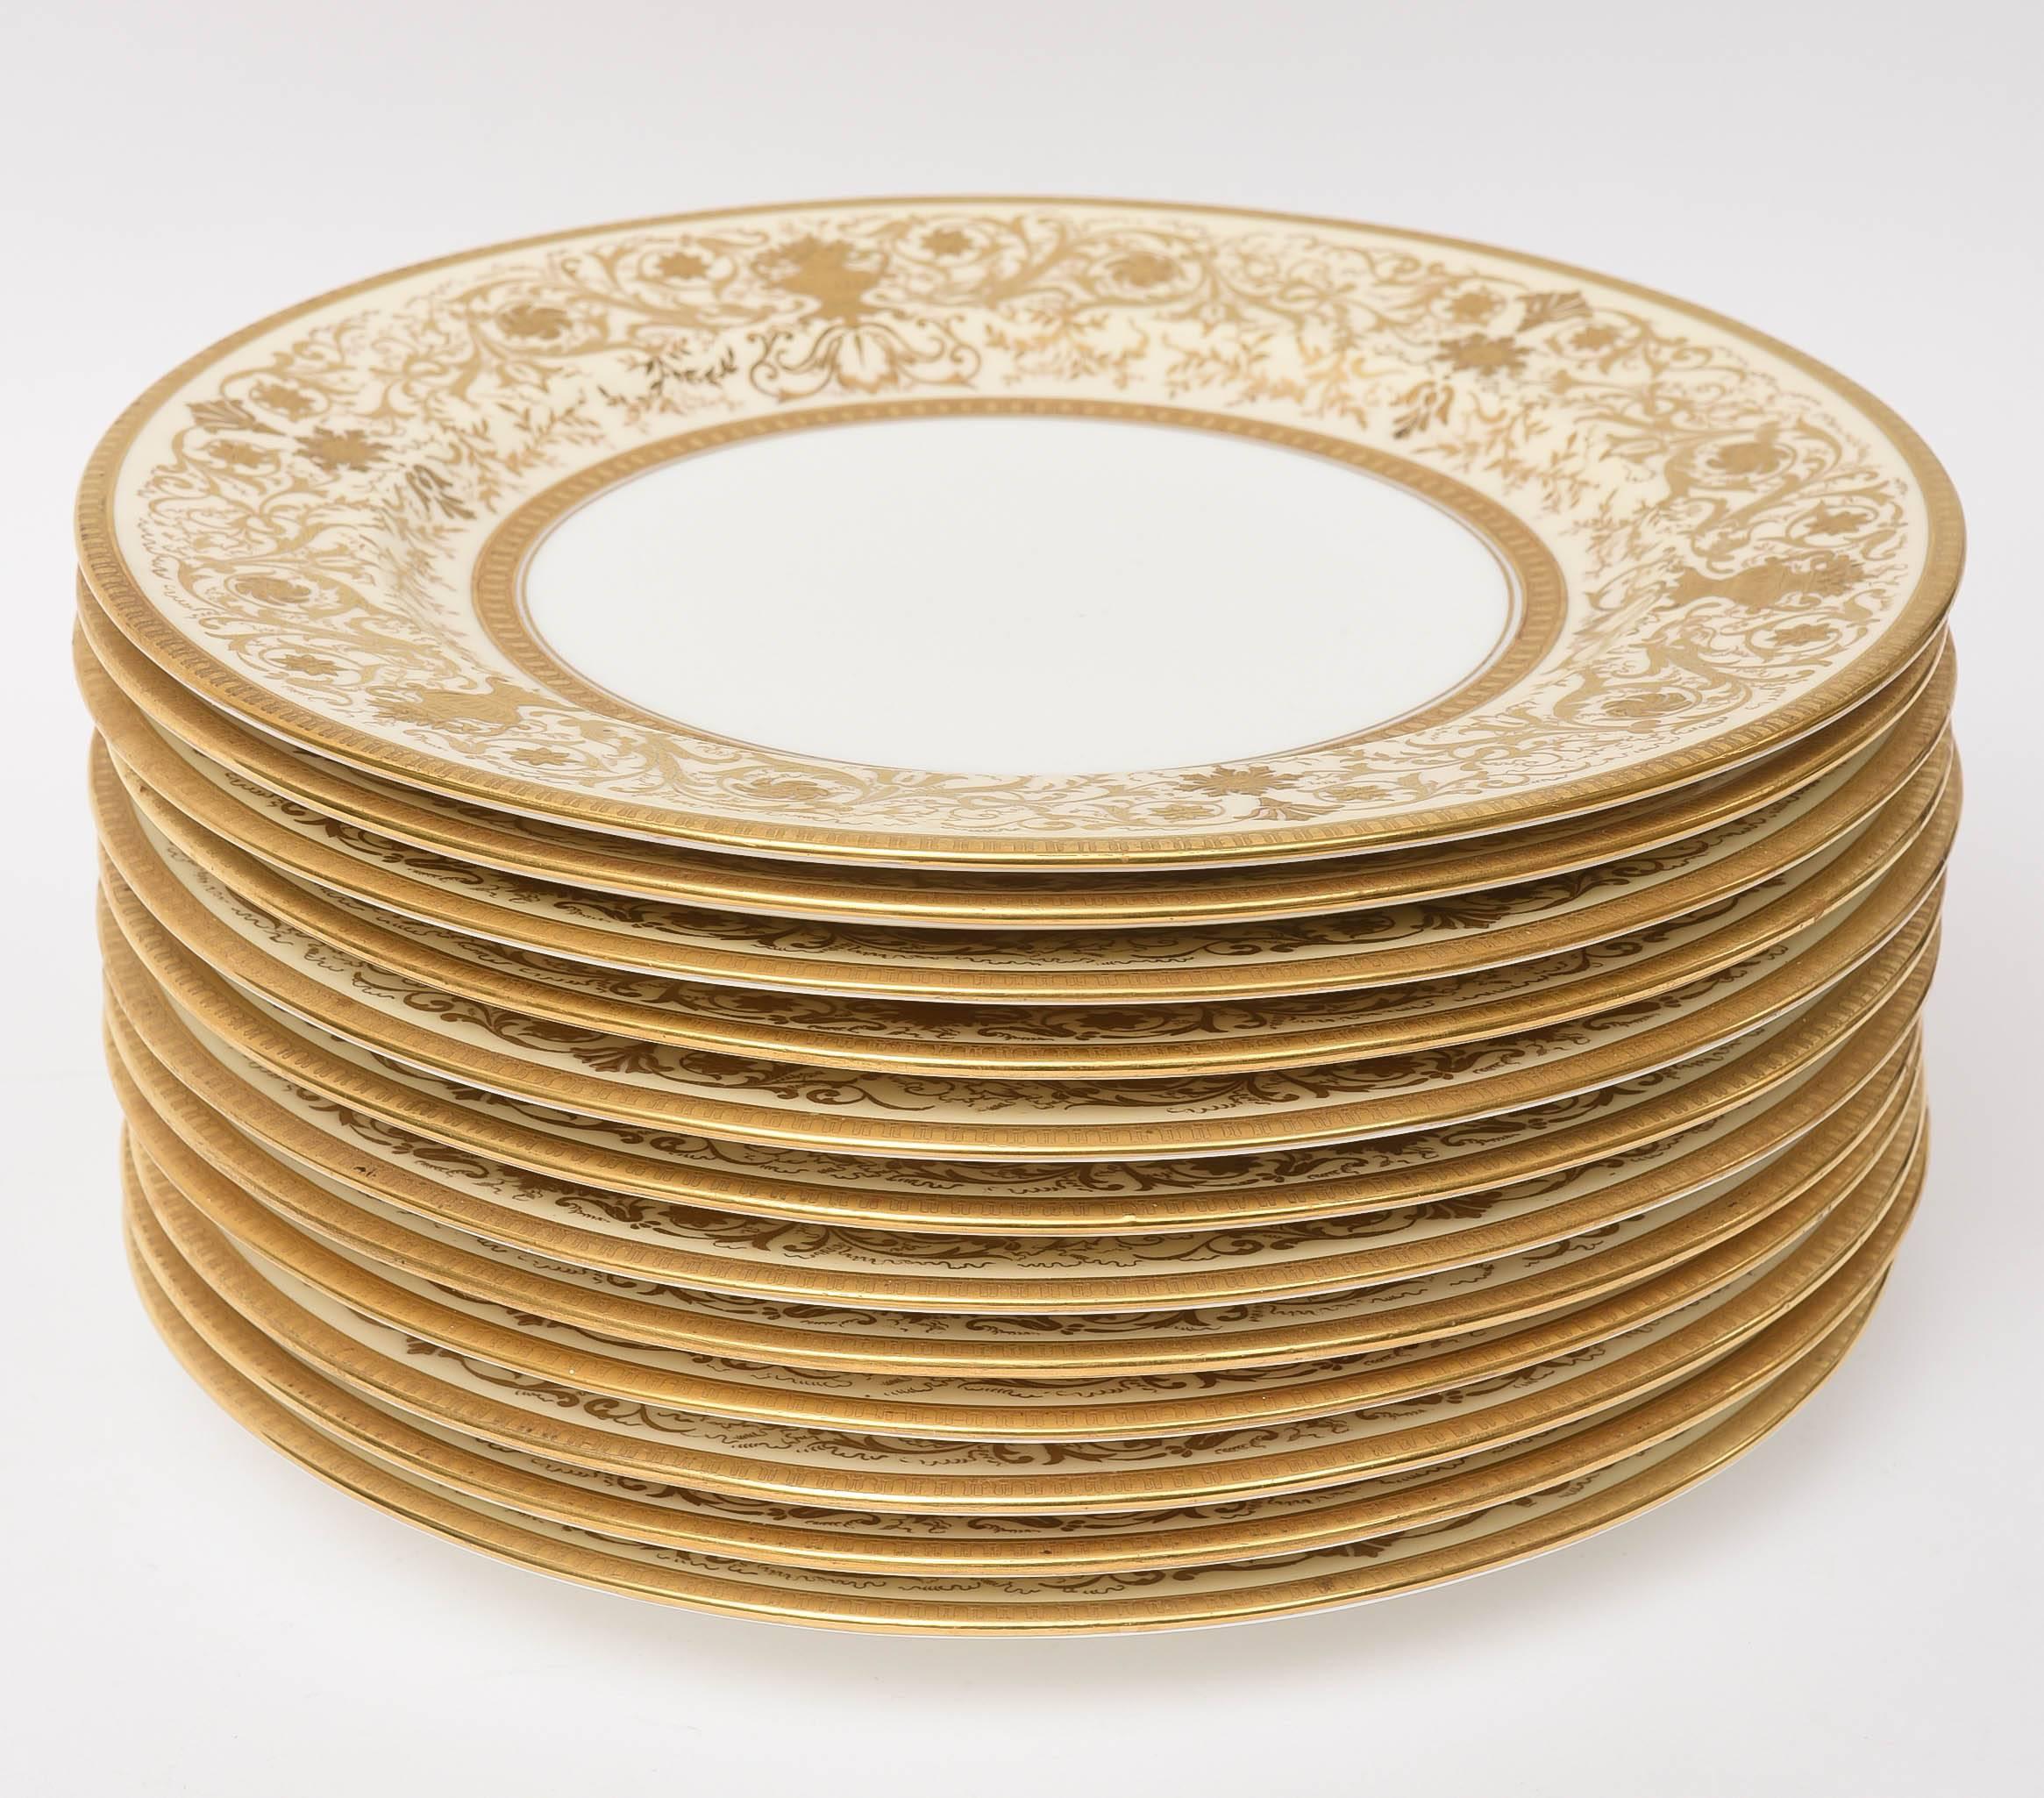 Early 20th Century 12 Antique English for Tiffany, Gilt Encrusted Plates by Coalport